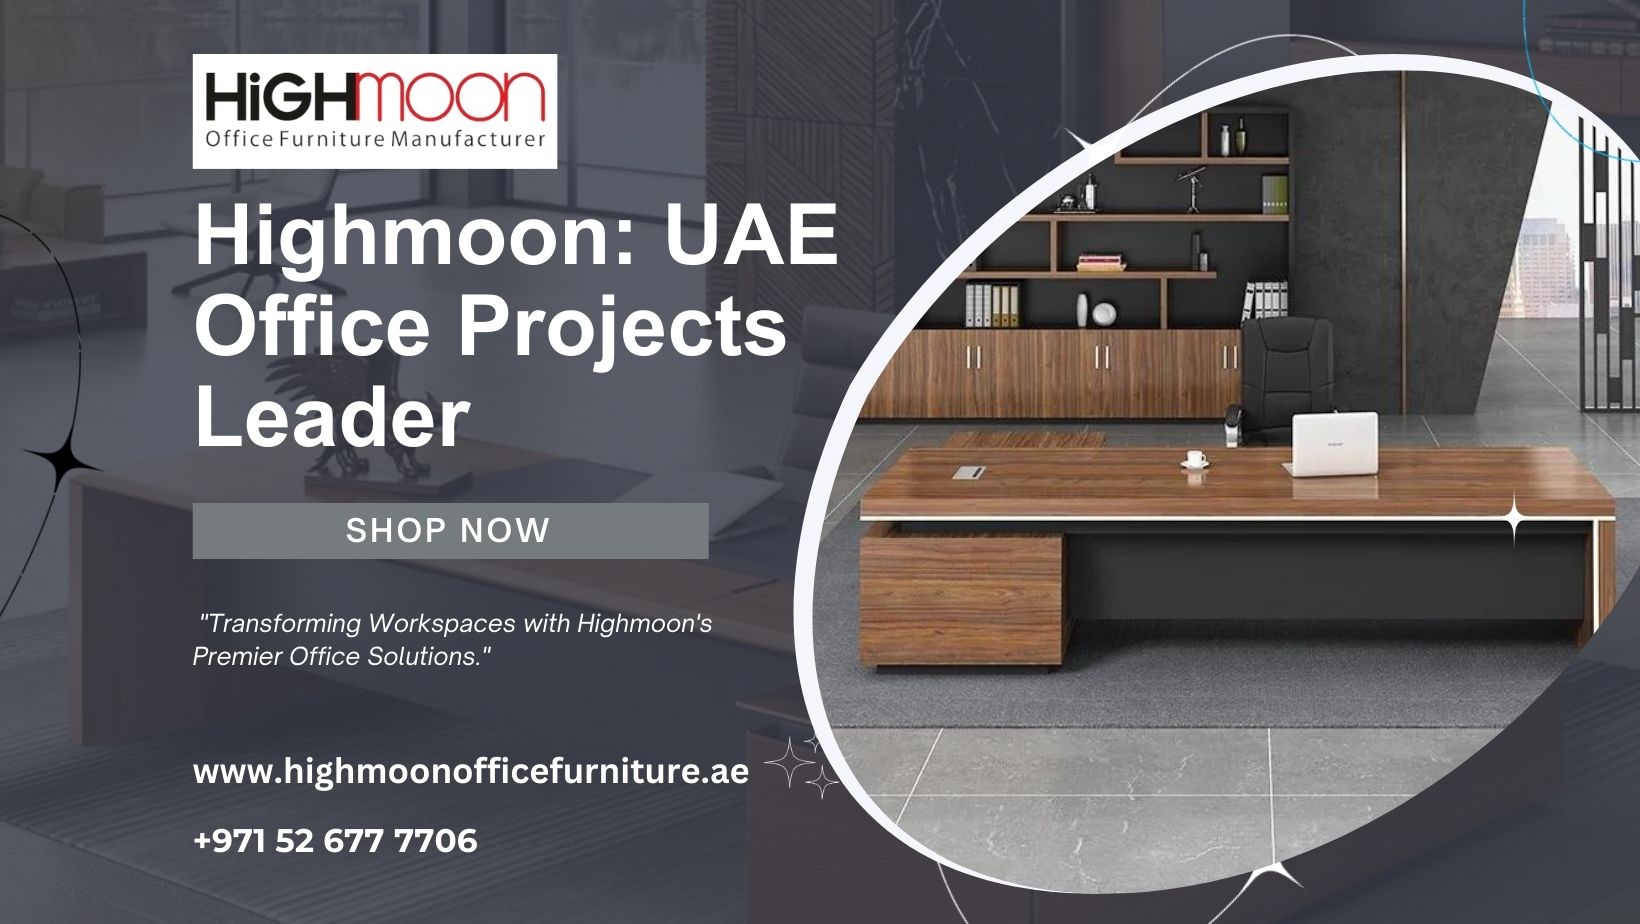 Office furniture projects in UAE